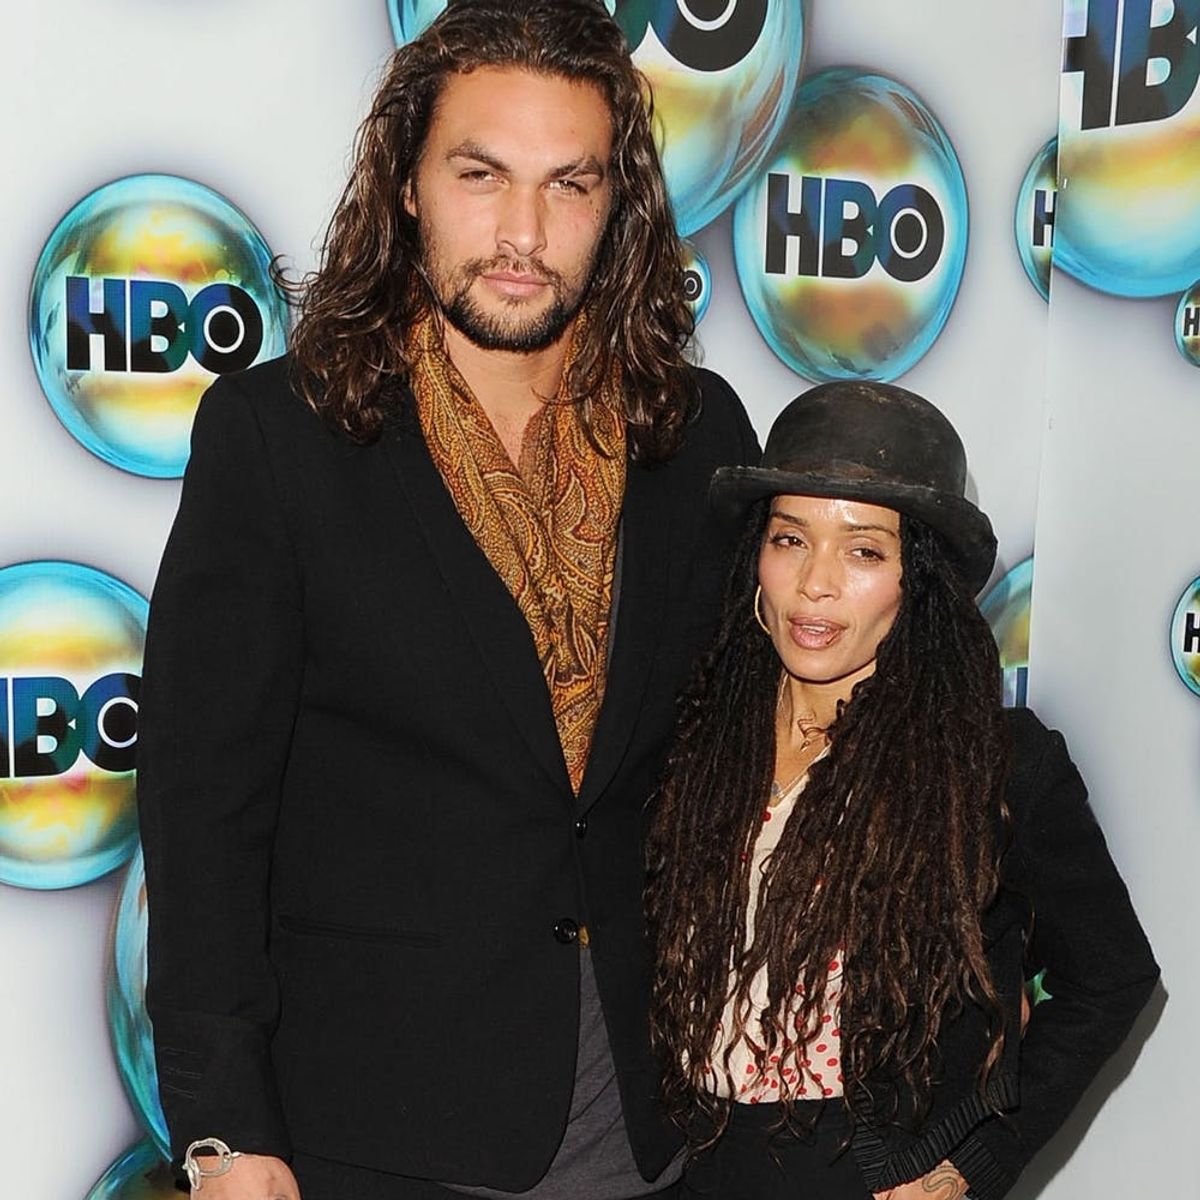 Jason Momoa and Lisa Bonet Have Reportedly Tied the Knot After 12 Years Together